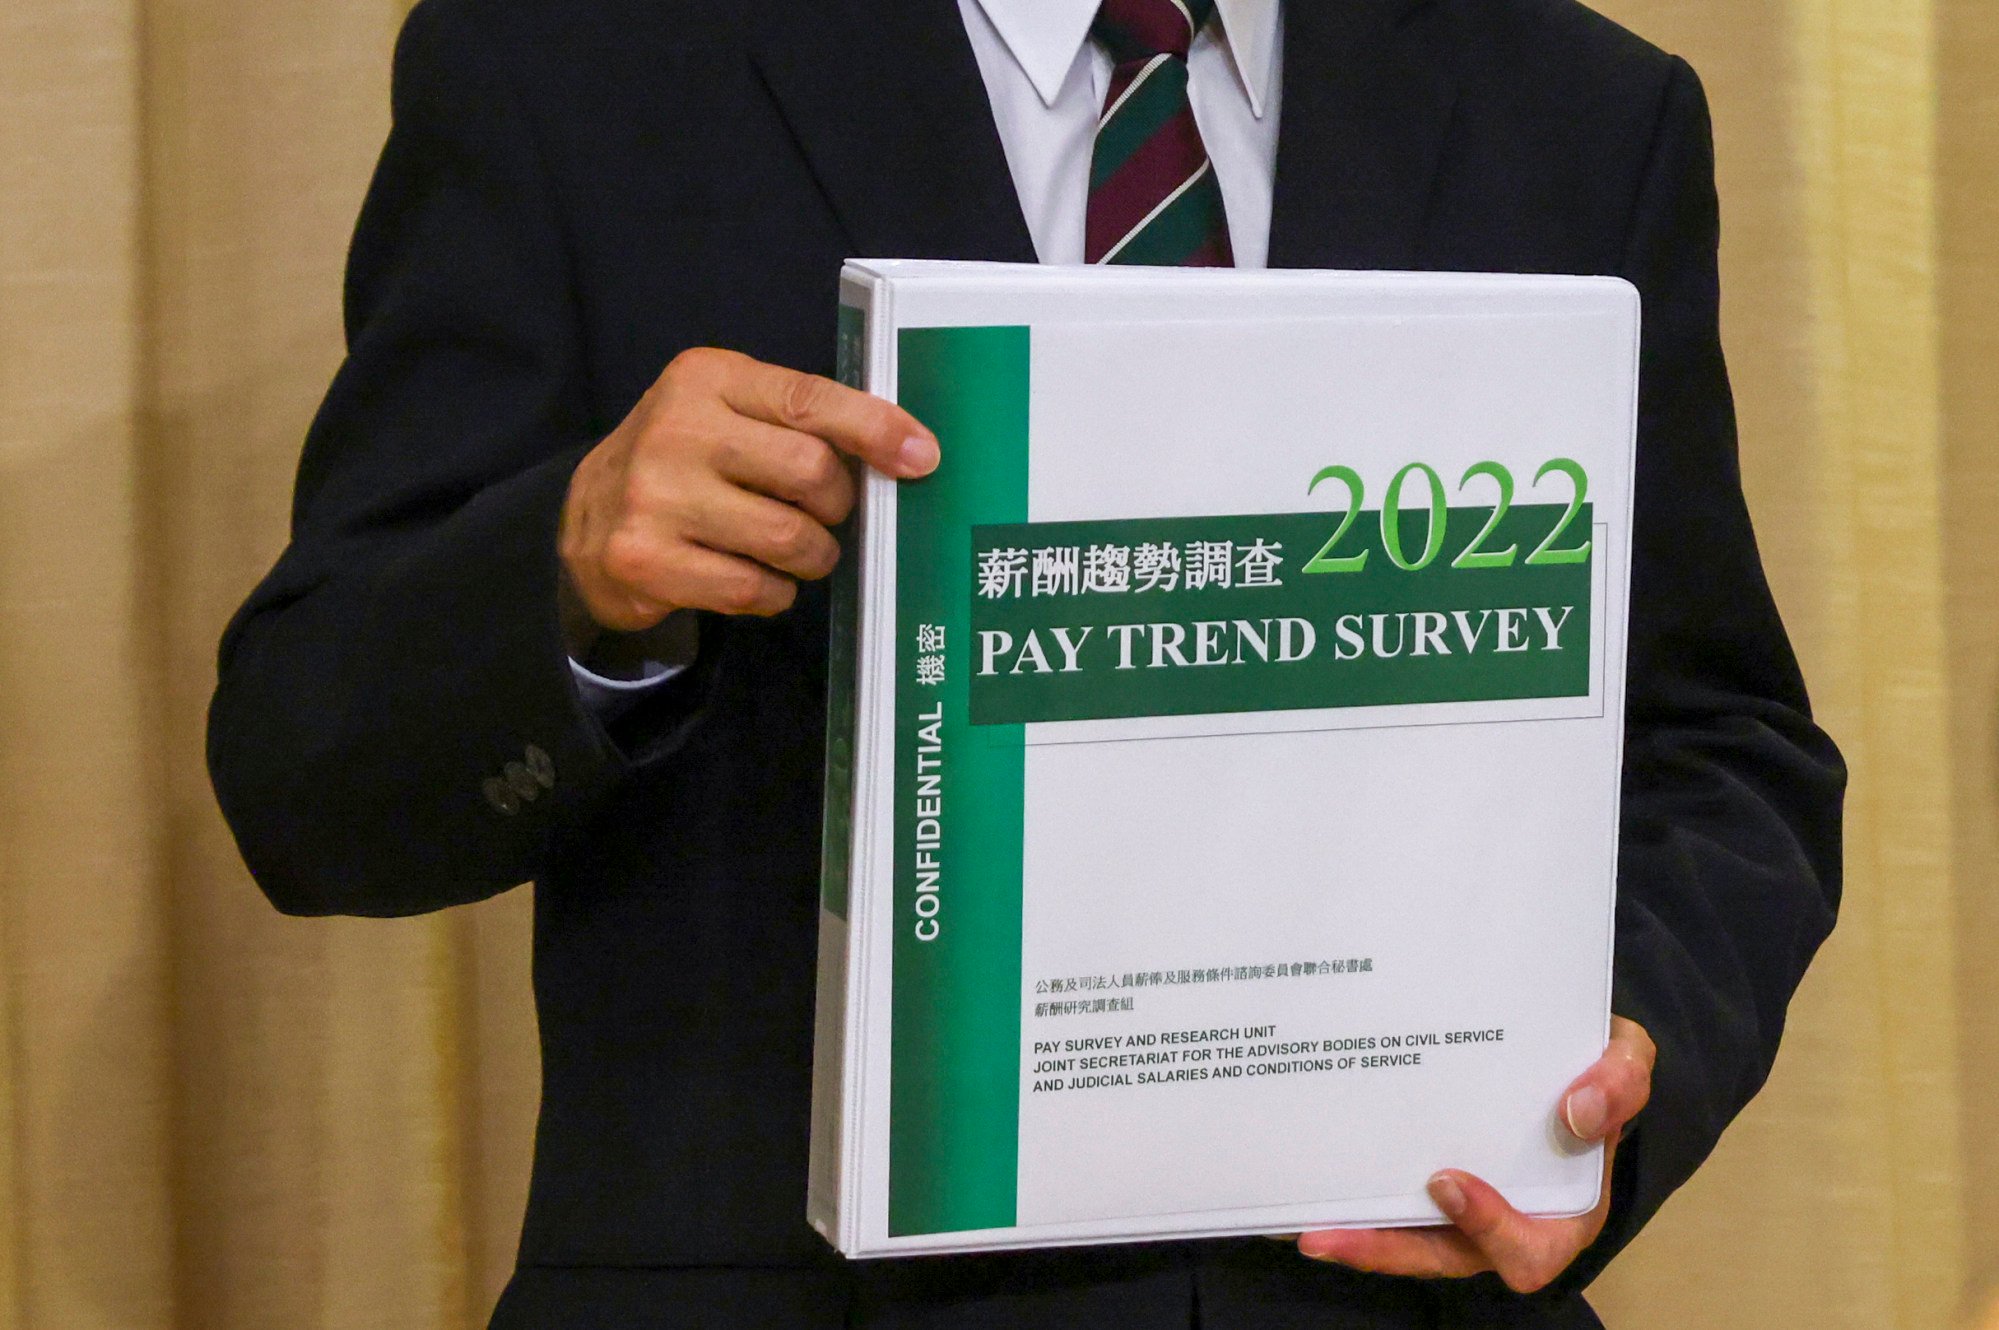 The latest pay trend survey suggested salary rises starting at 2.04 per cent for junior-ranking staff to 7.26 per cent for high-earners in the civil service. Photo: Nora Tam